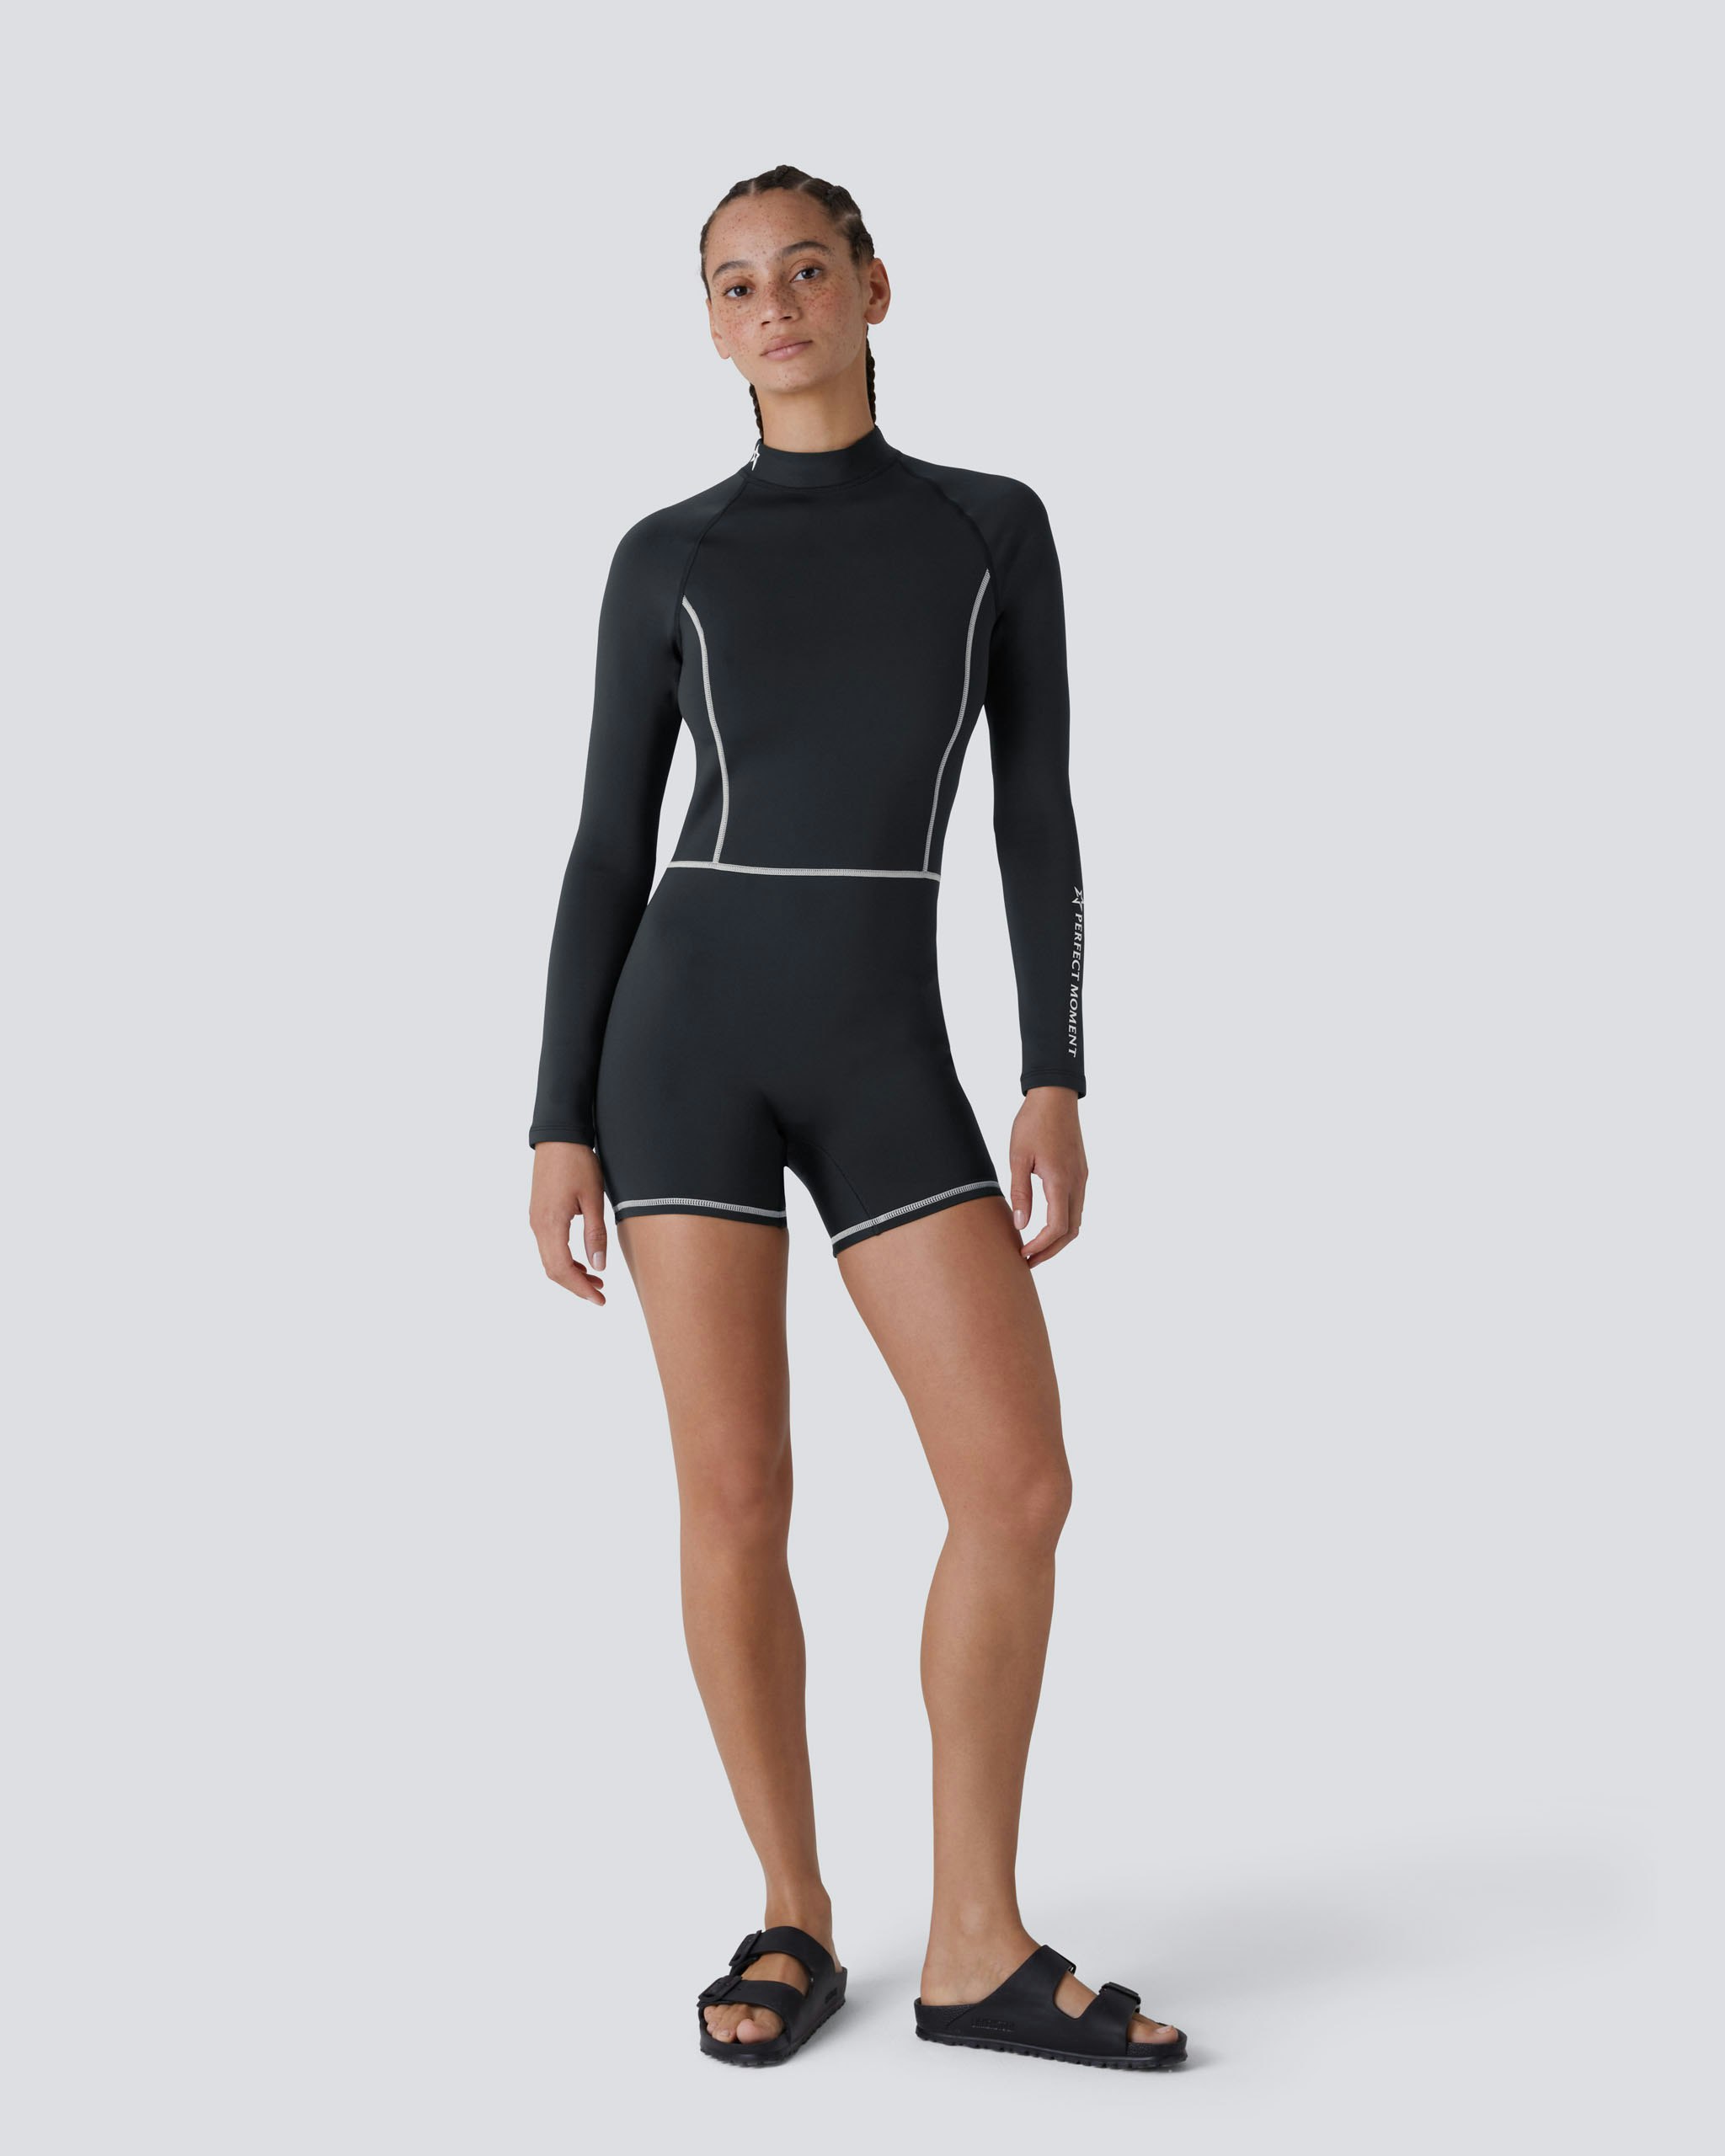 Airy Wetsuit 1